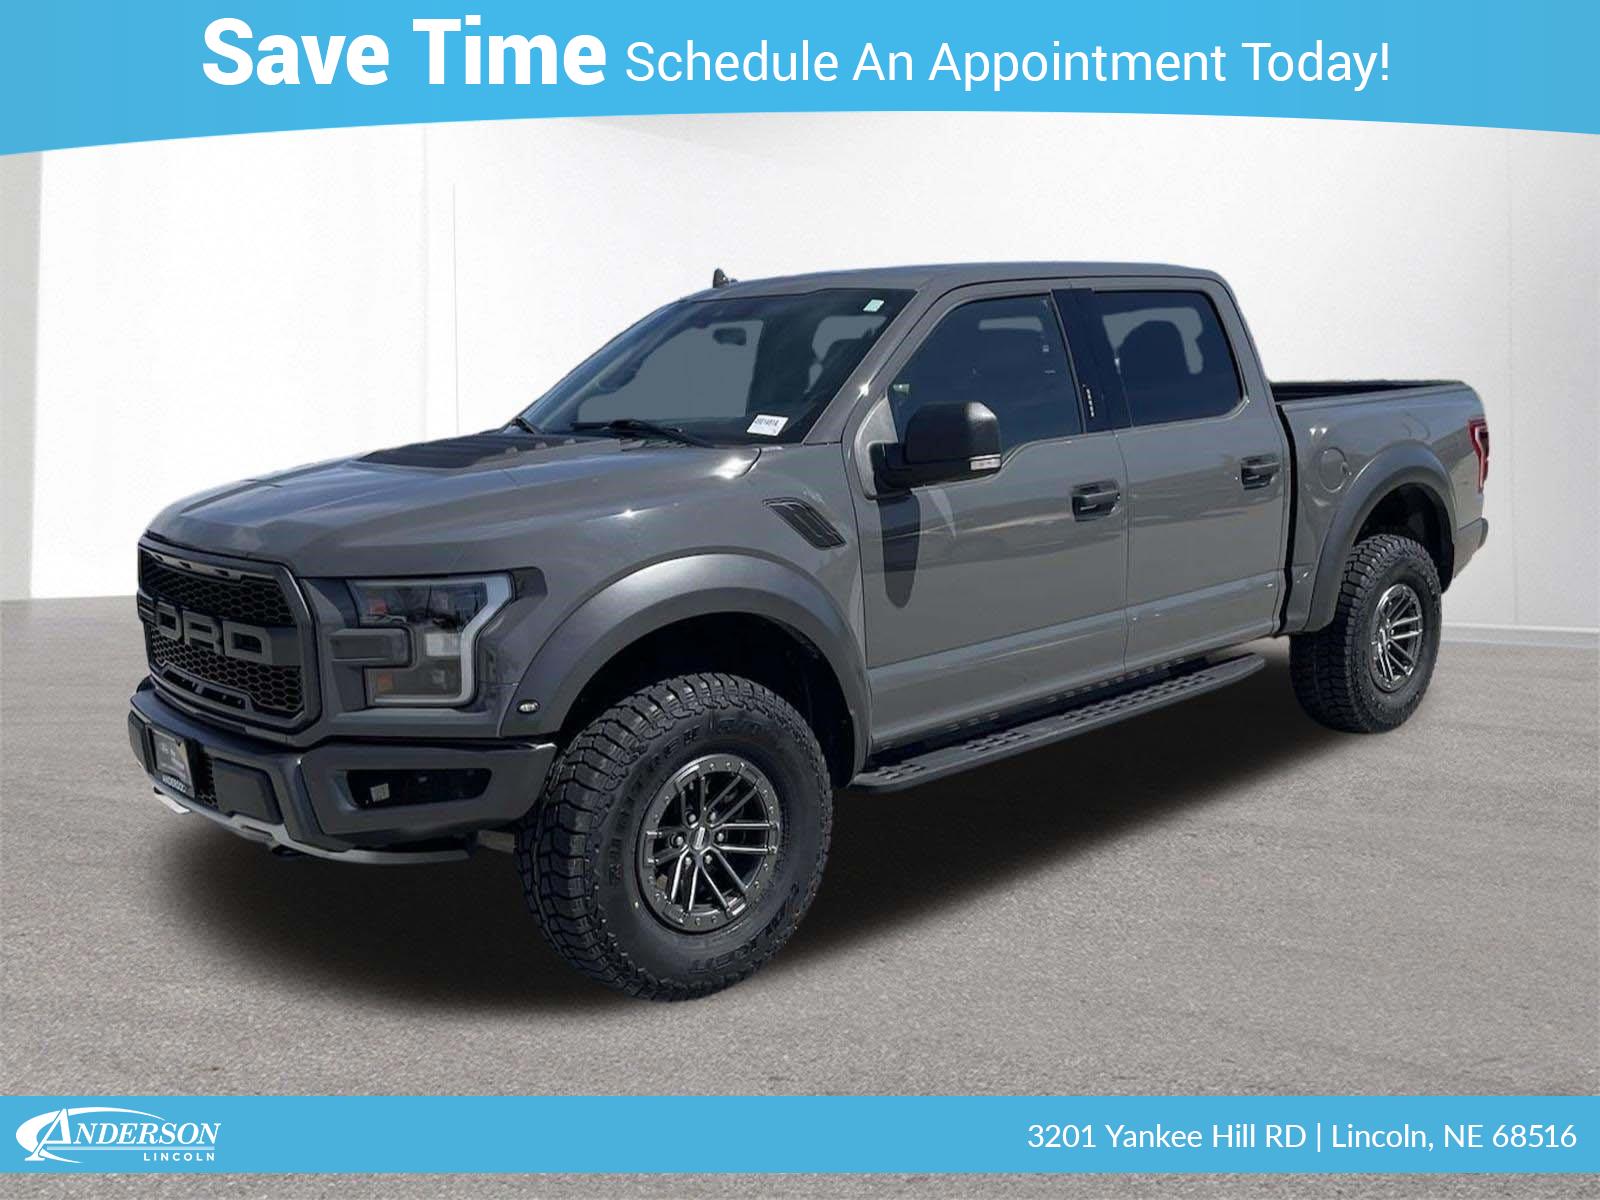 Used 2020 Ford F-150 Raptor Stock: 4001491A